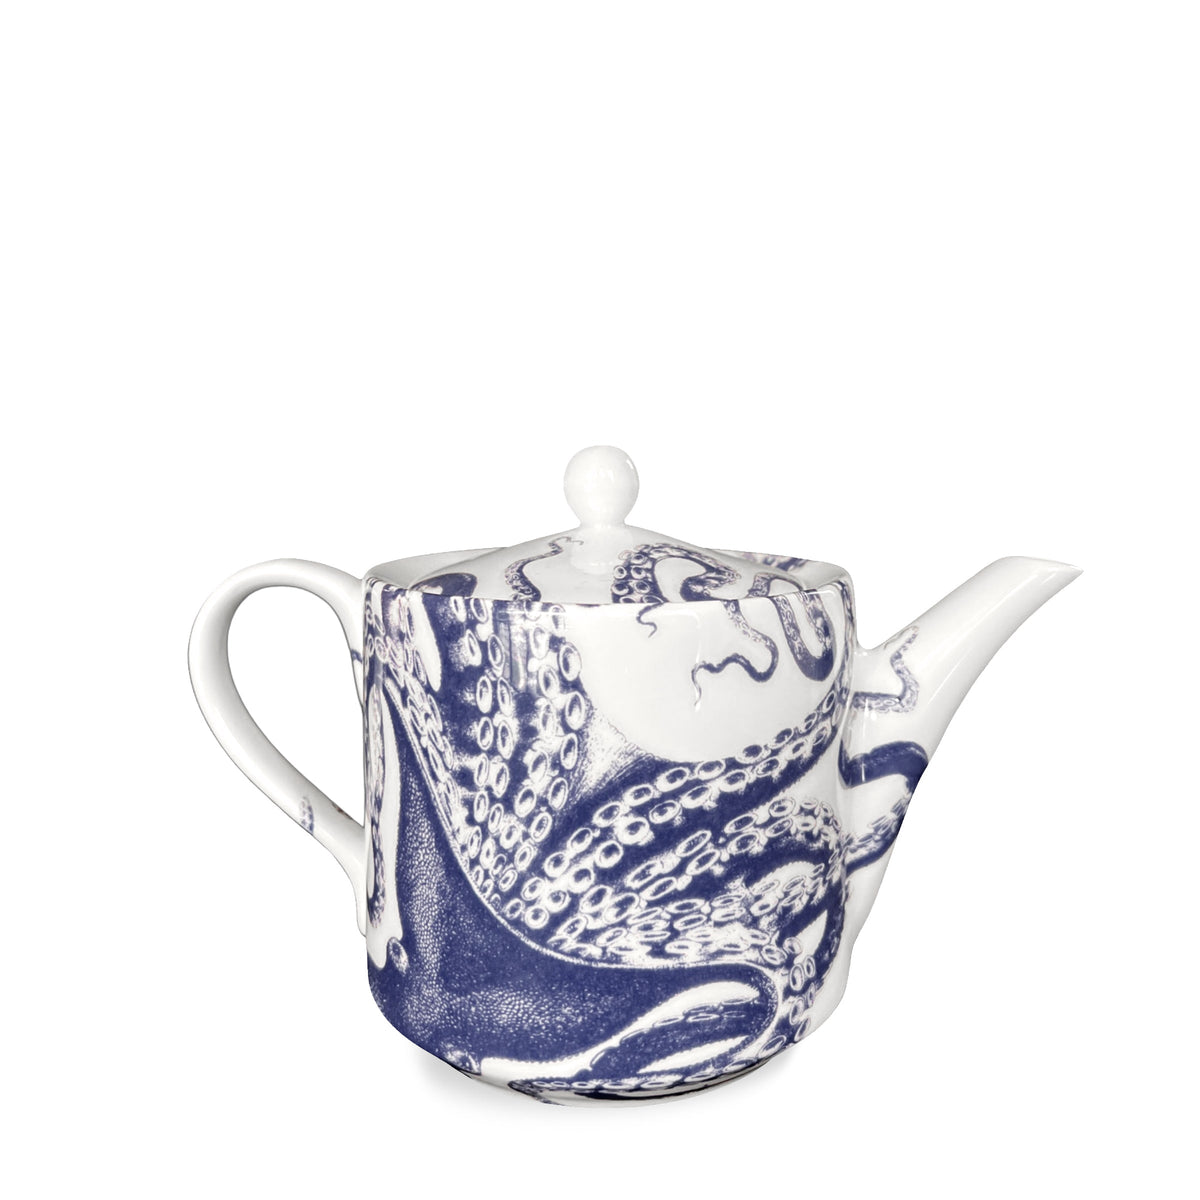 A Lucy Petite Teapot by Caskata with a deepwater whimsy design featuring an octopus.